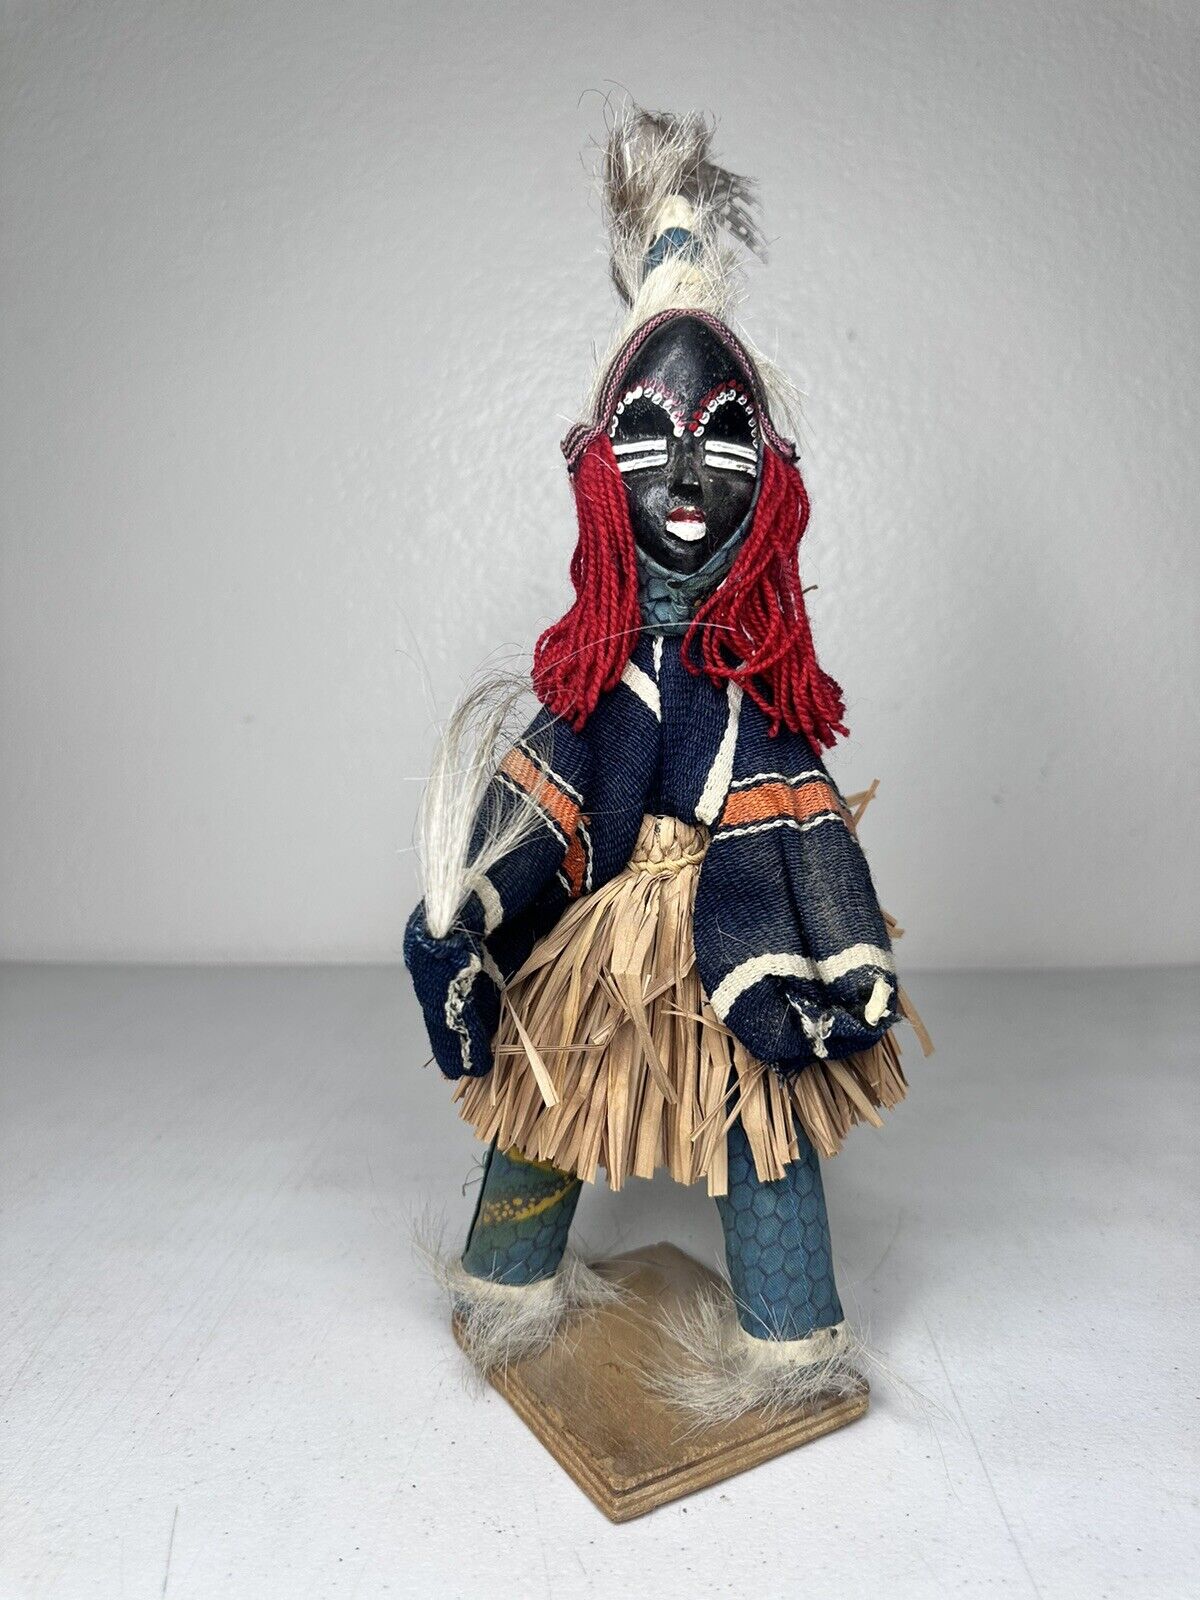 Handmade 15” African Tribal Shaman Doll Sculpture - Authentic Cultural Collect